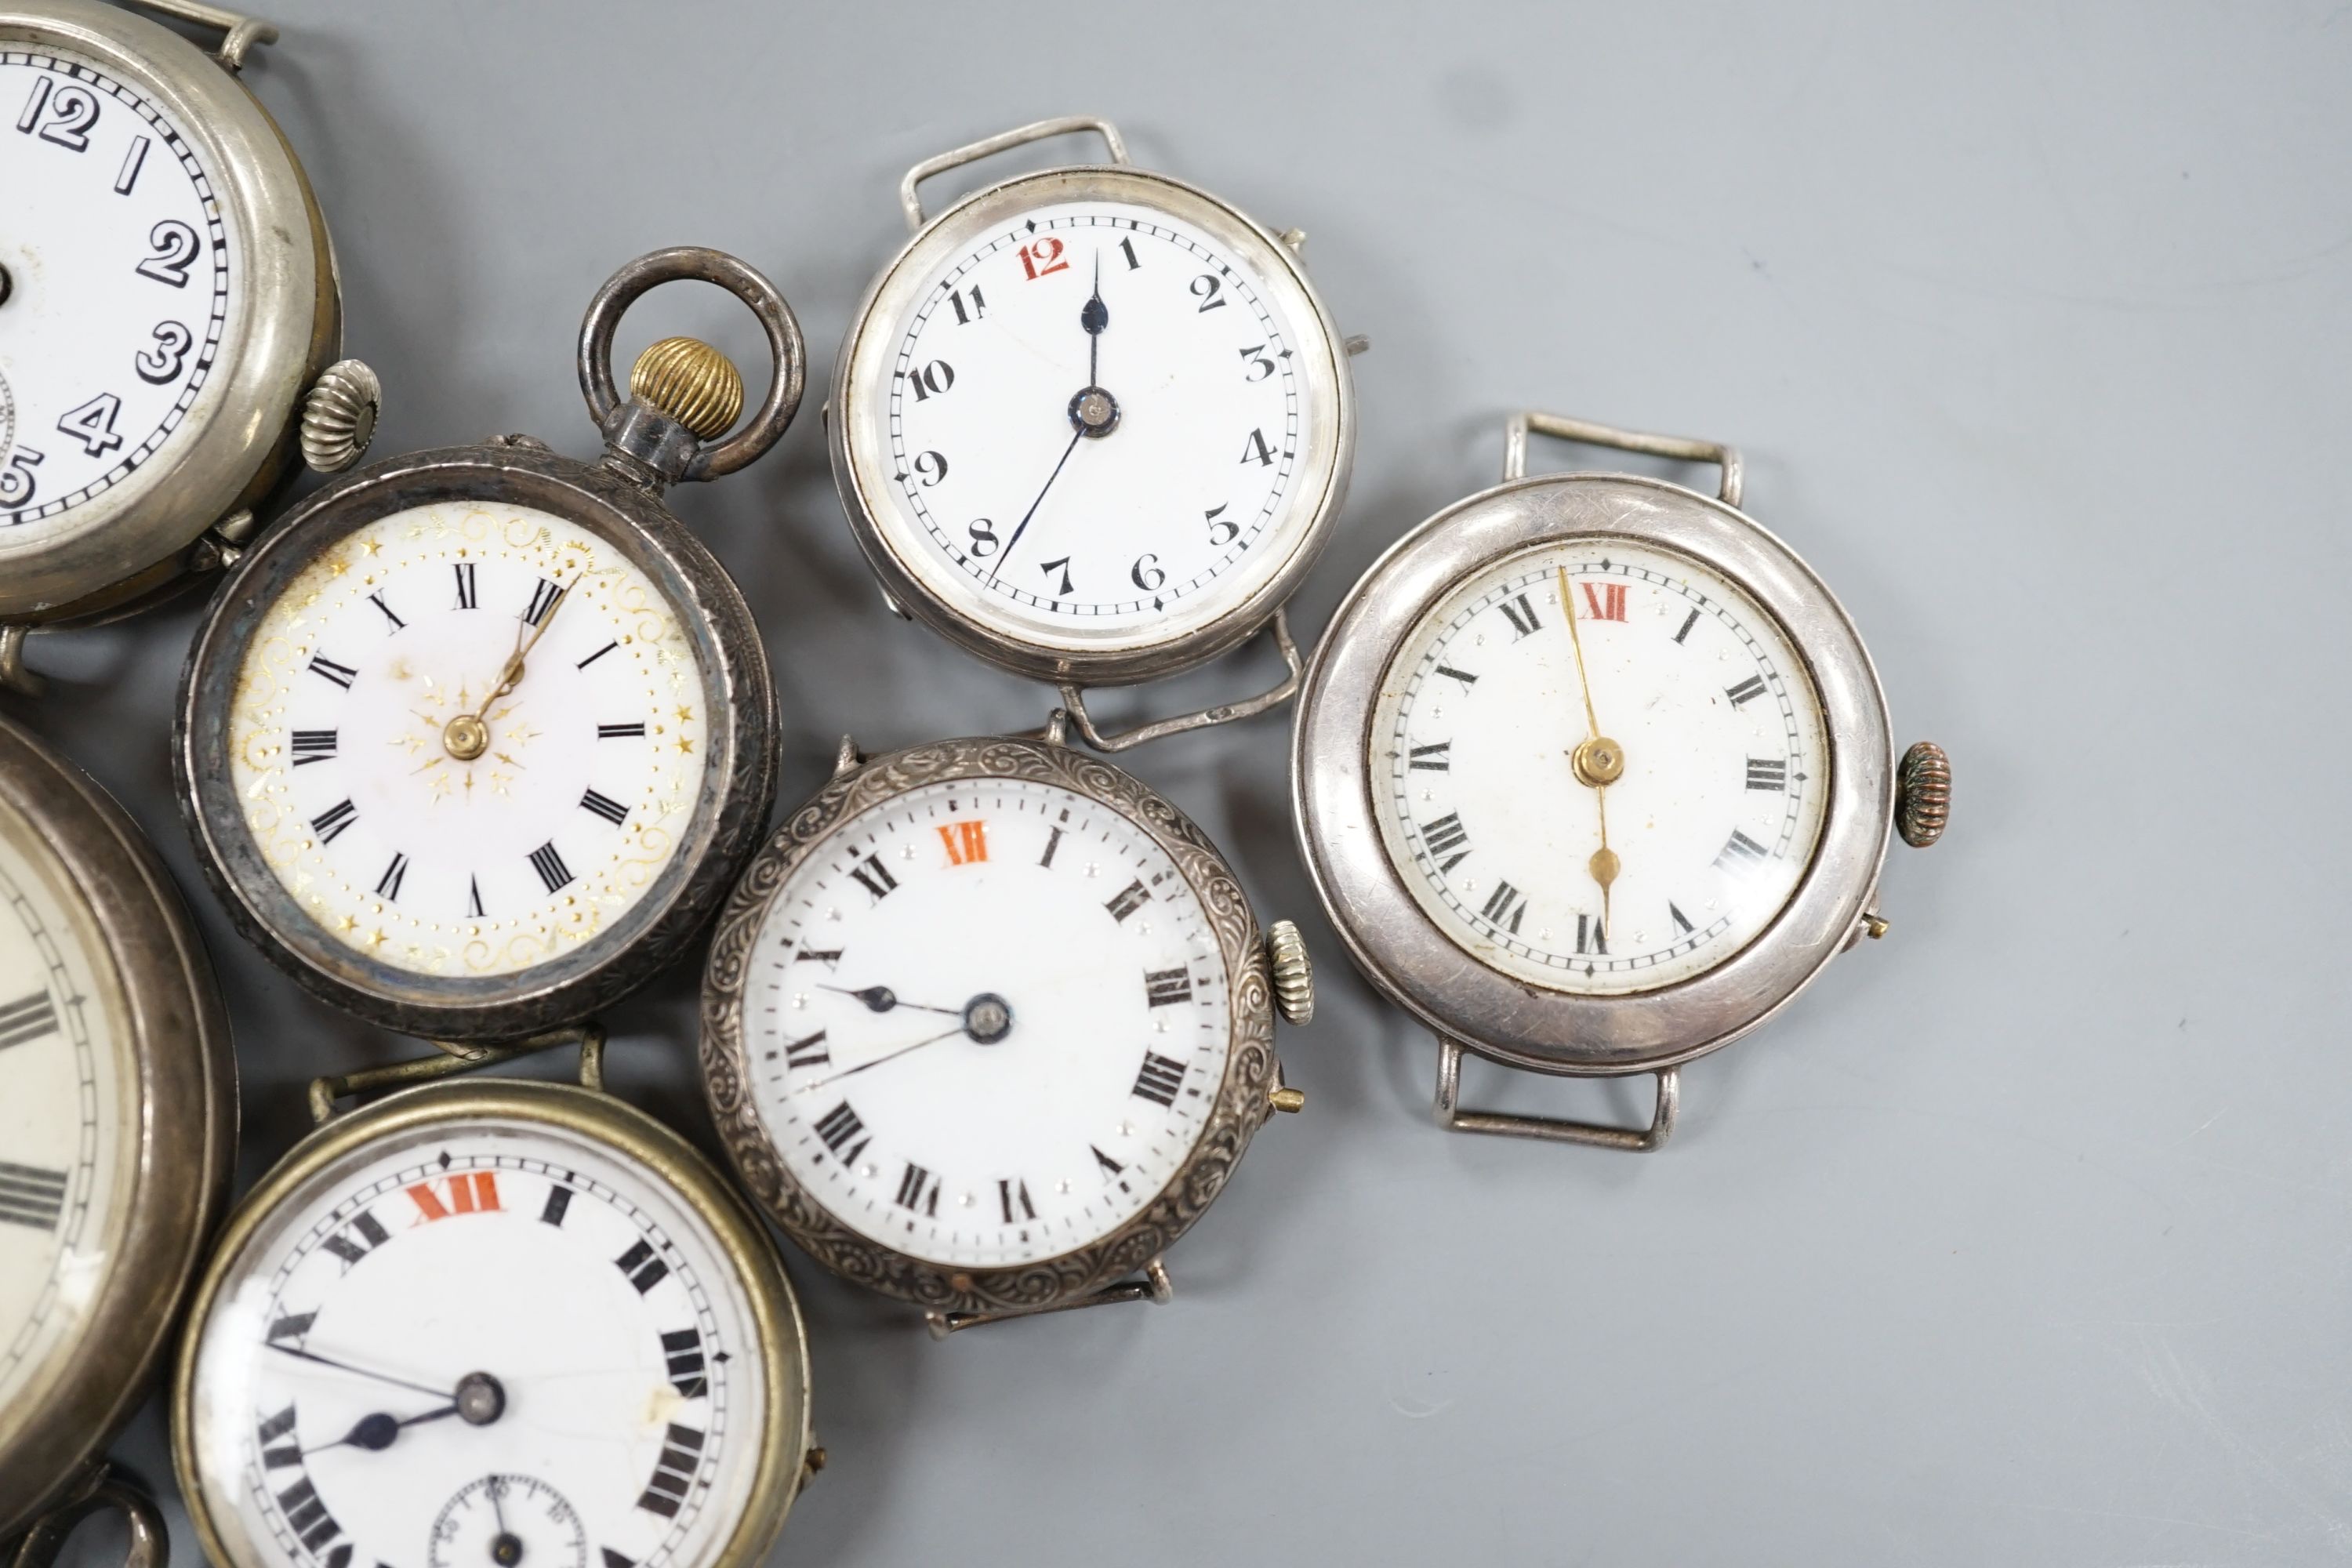 Four assorted early 20th century silver wrist watches, a silver fob watch, two base metal wrist watches, brooch, pendant and two pocket watches including one silver open face.